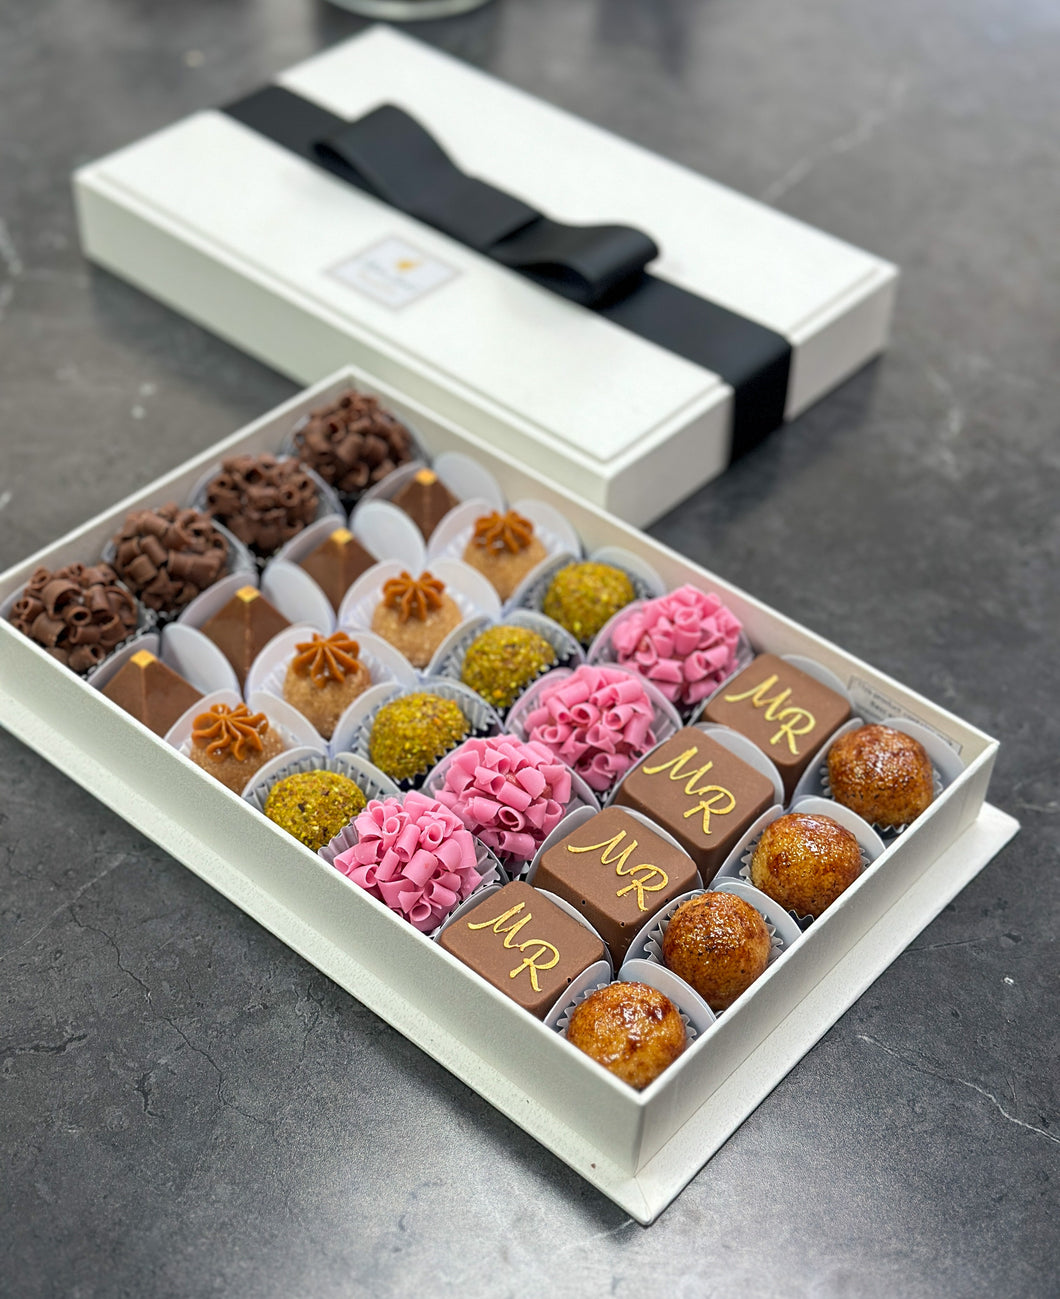 28 Assorted Sweets Gift Box